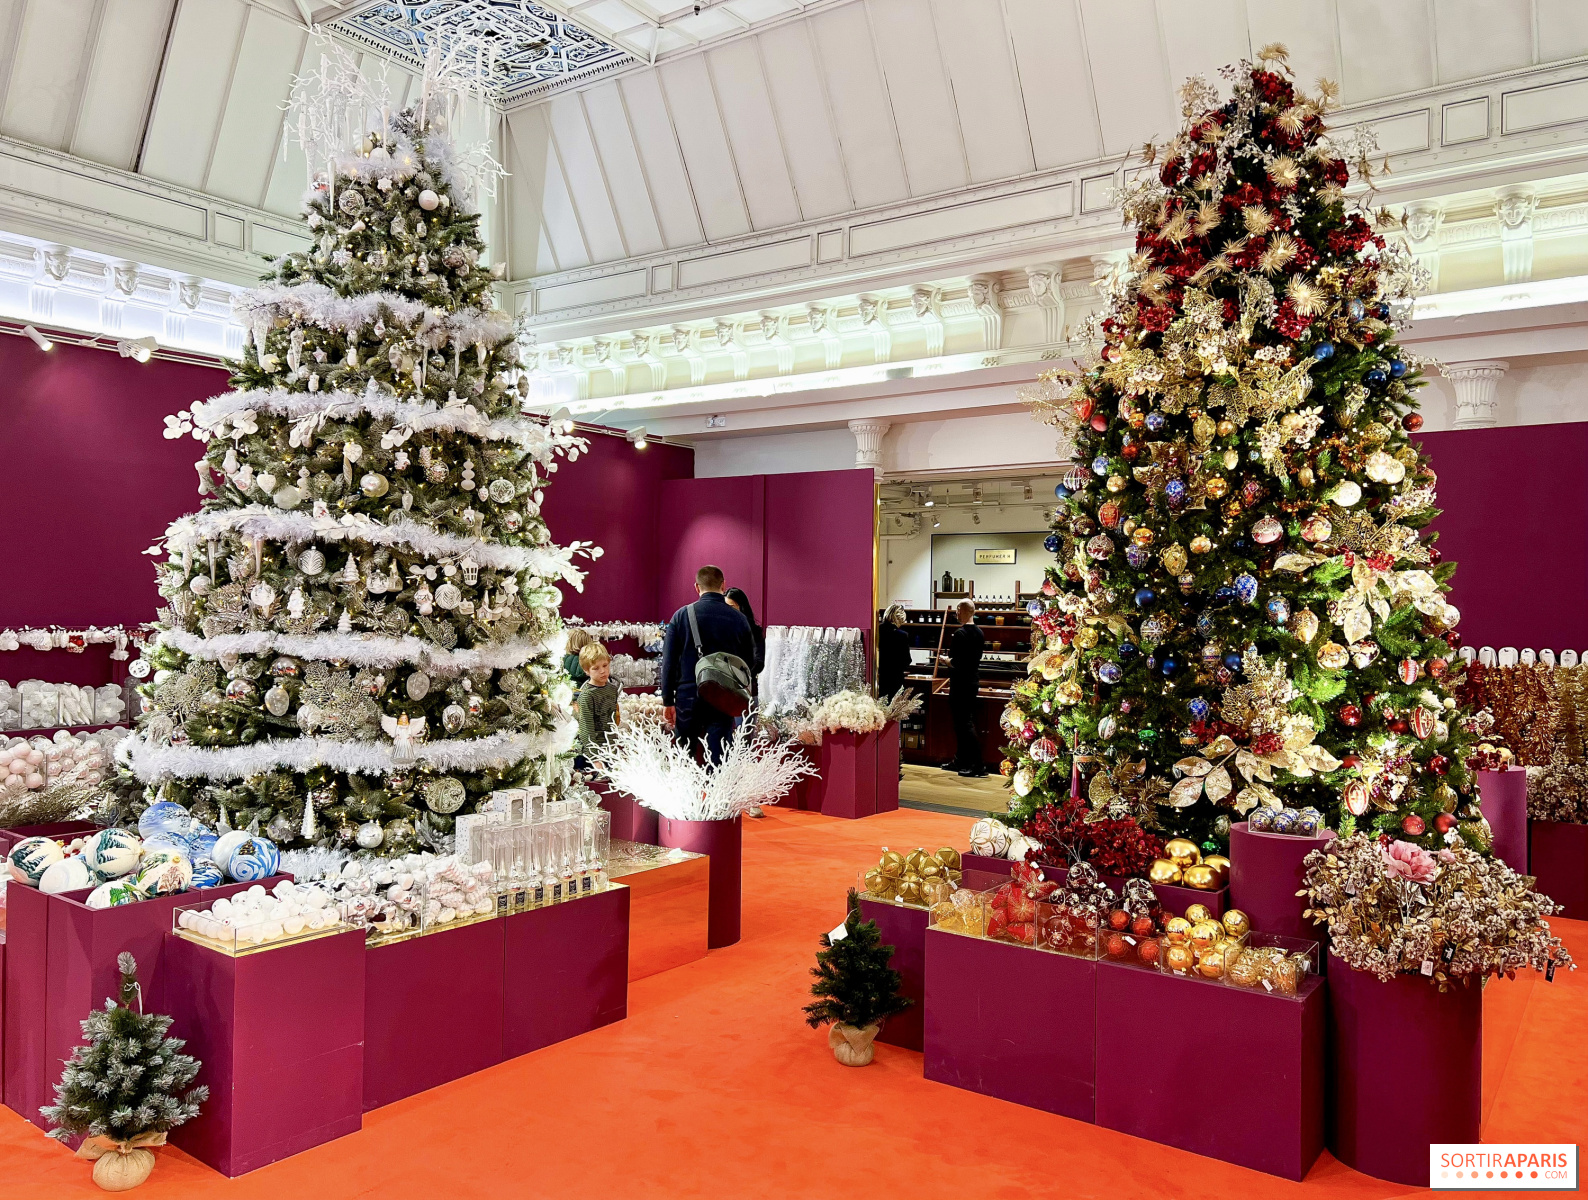 Vogue France - Saturday, Le Bon Marché Rive Gauche reopened its doors! What  if we went to admire these spectacular Christmas decorations while  respecting barrier gestures? © Instagram @lebonmarcherivegauche